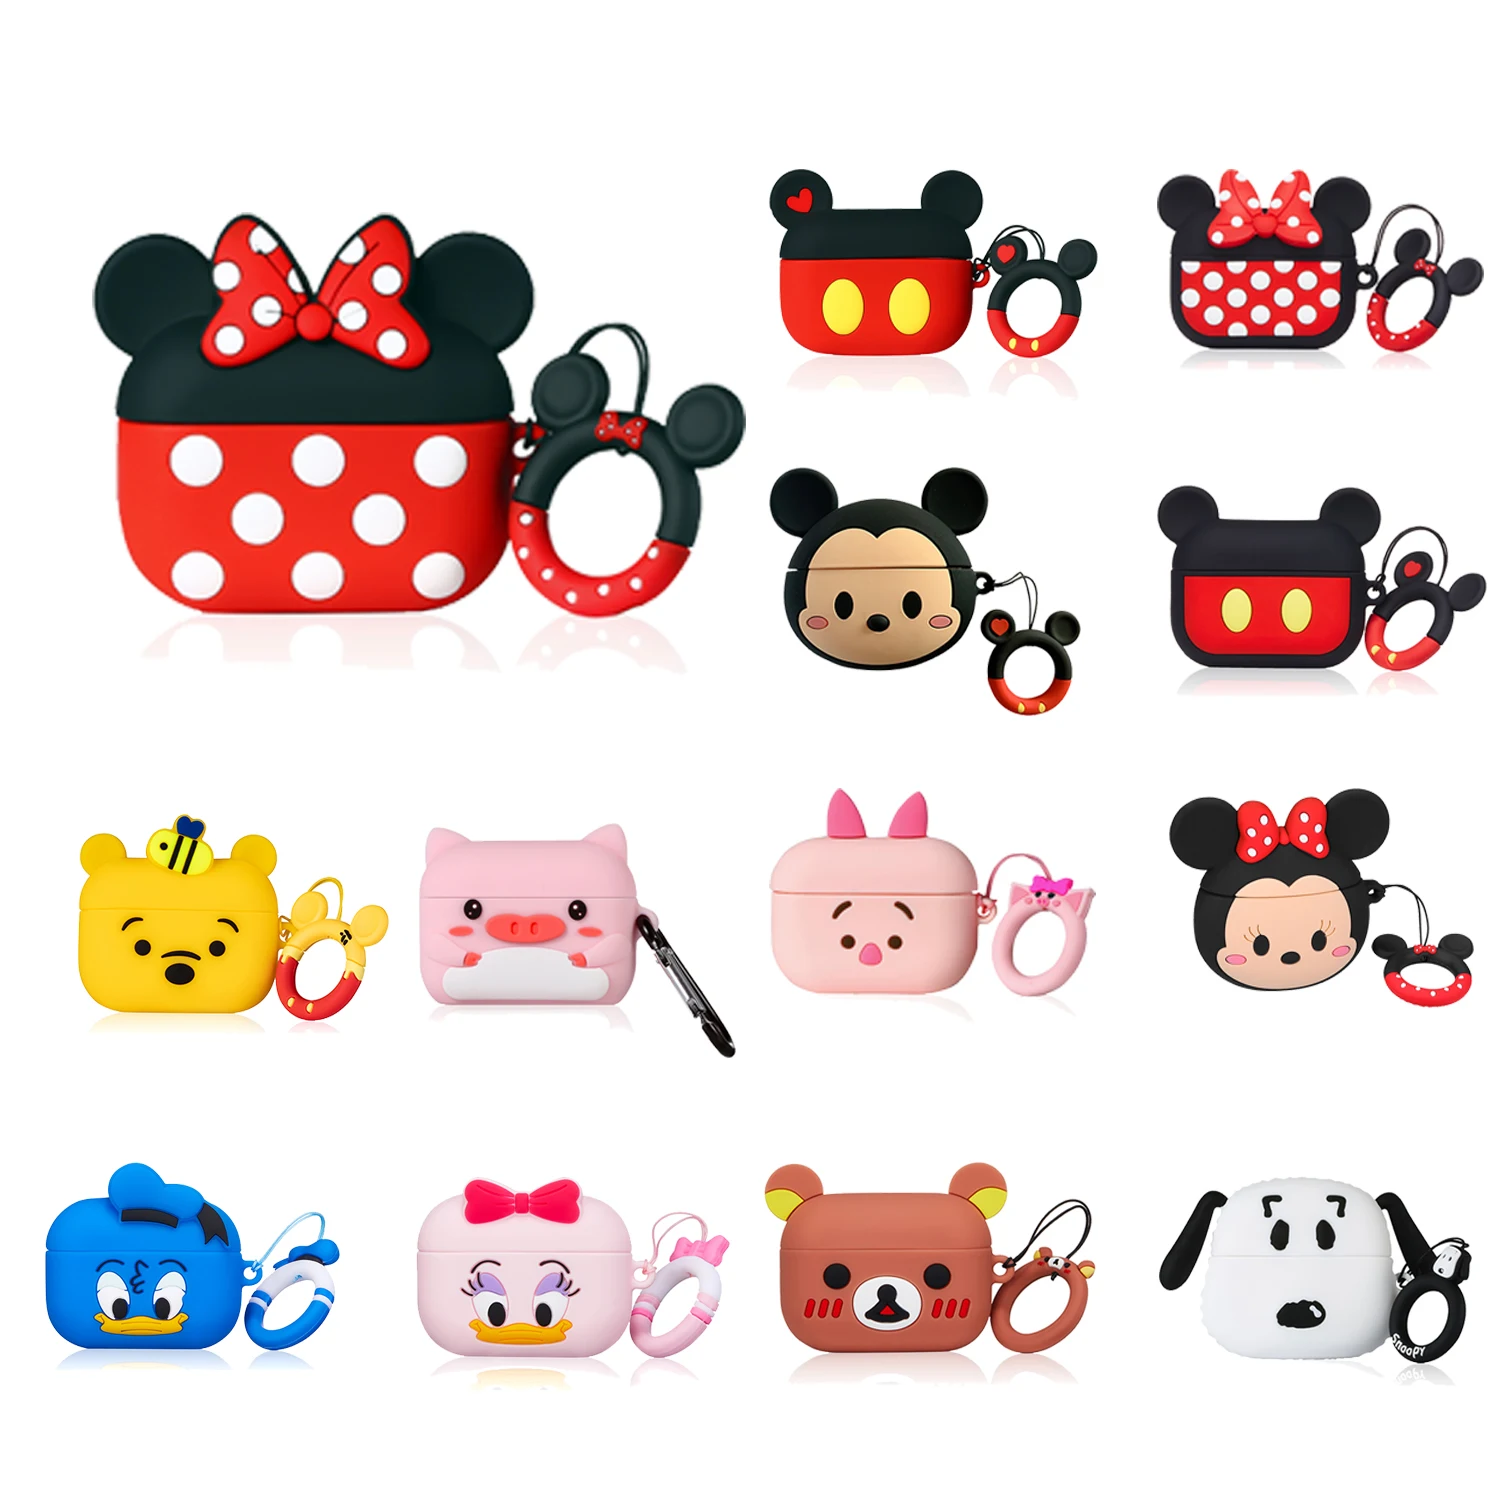 

Amazon Hot Sale Earphone Protective For Mickey Minnie Mouse For Disney For Airpod Case For Airpod Pro/3, Multiple colors